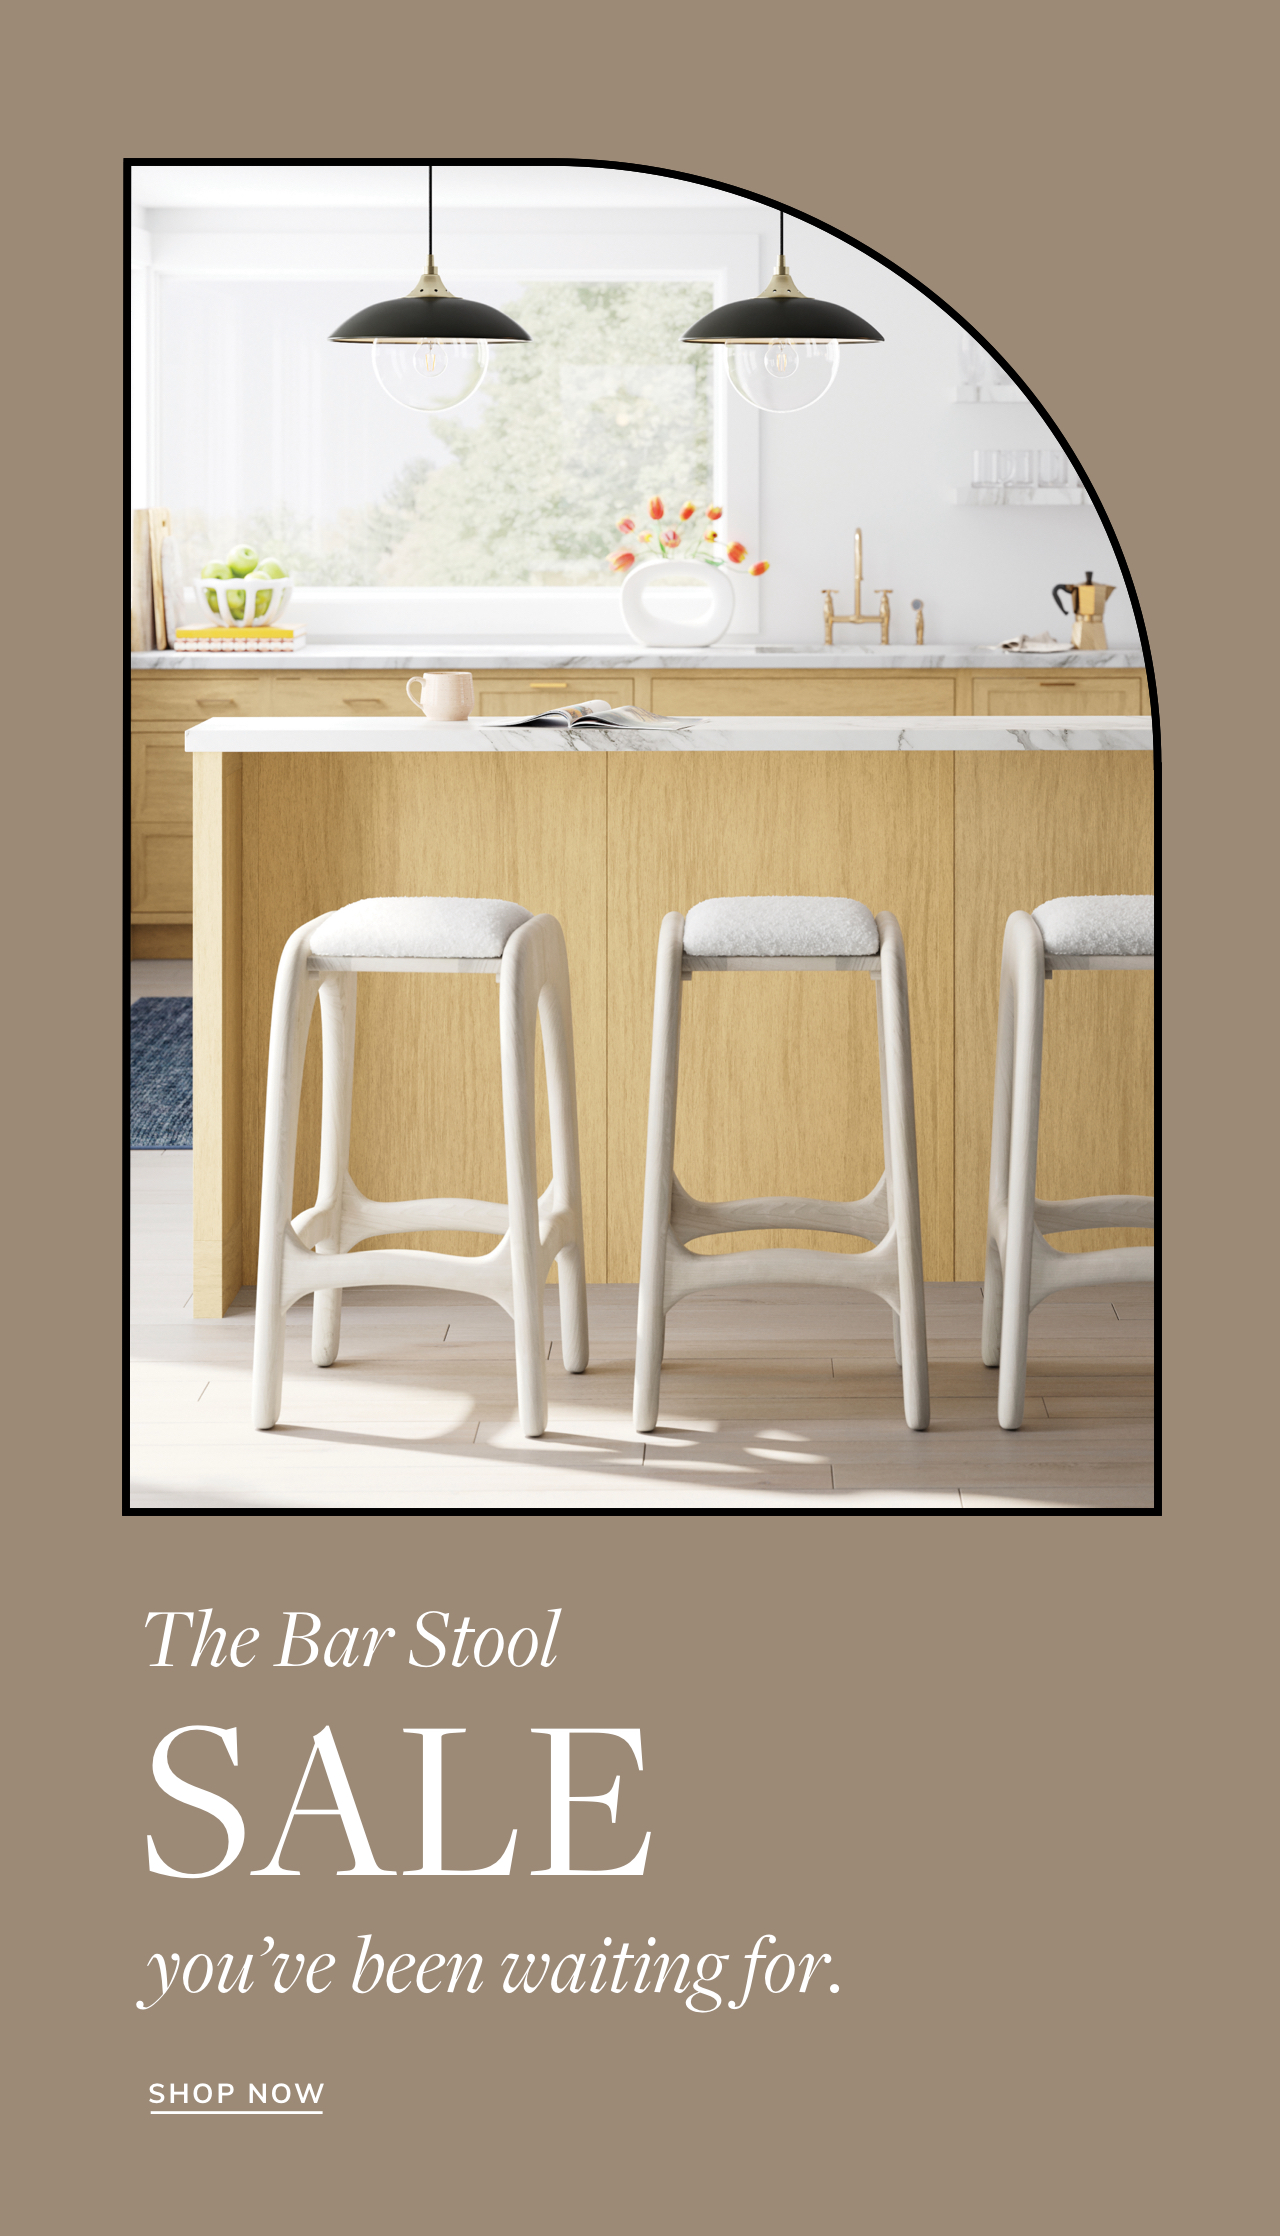  The Bar Stool NI DY youve been waiting for. SHOP NOW 